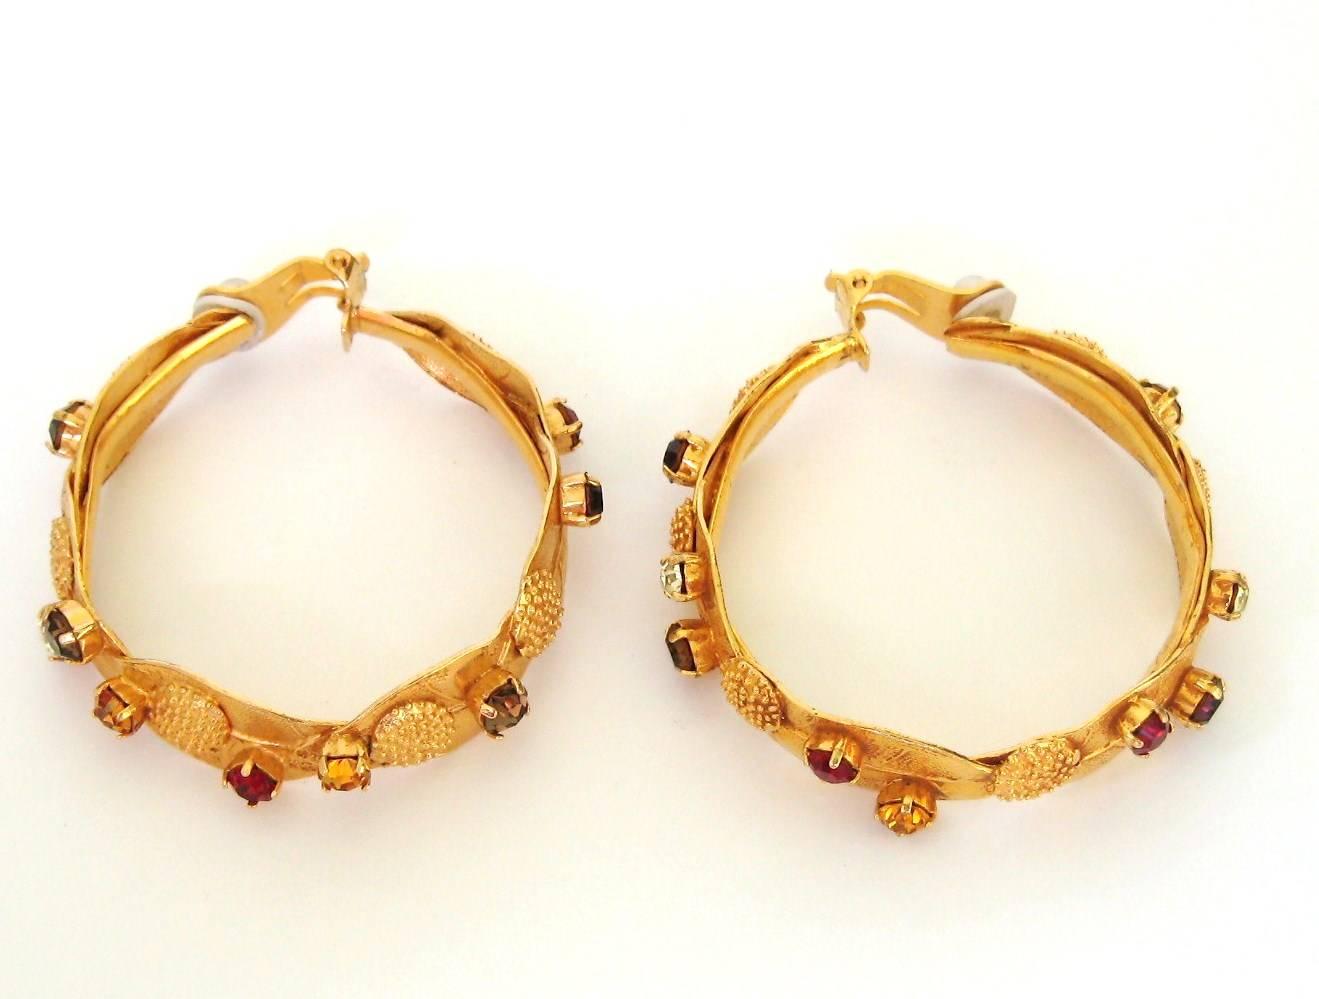 These are Fabulous Hoop earrings, from a collection of Dominique Aurientis. Oversized gilt metal hoops with prong set colored crystals set all around the entire hoop. Clip On style earrings. 2.19 inches. We have many more pieces on our storefront.